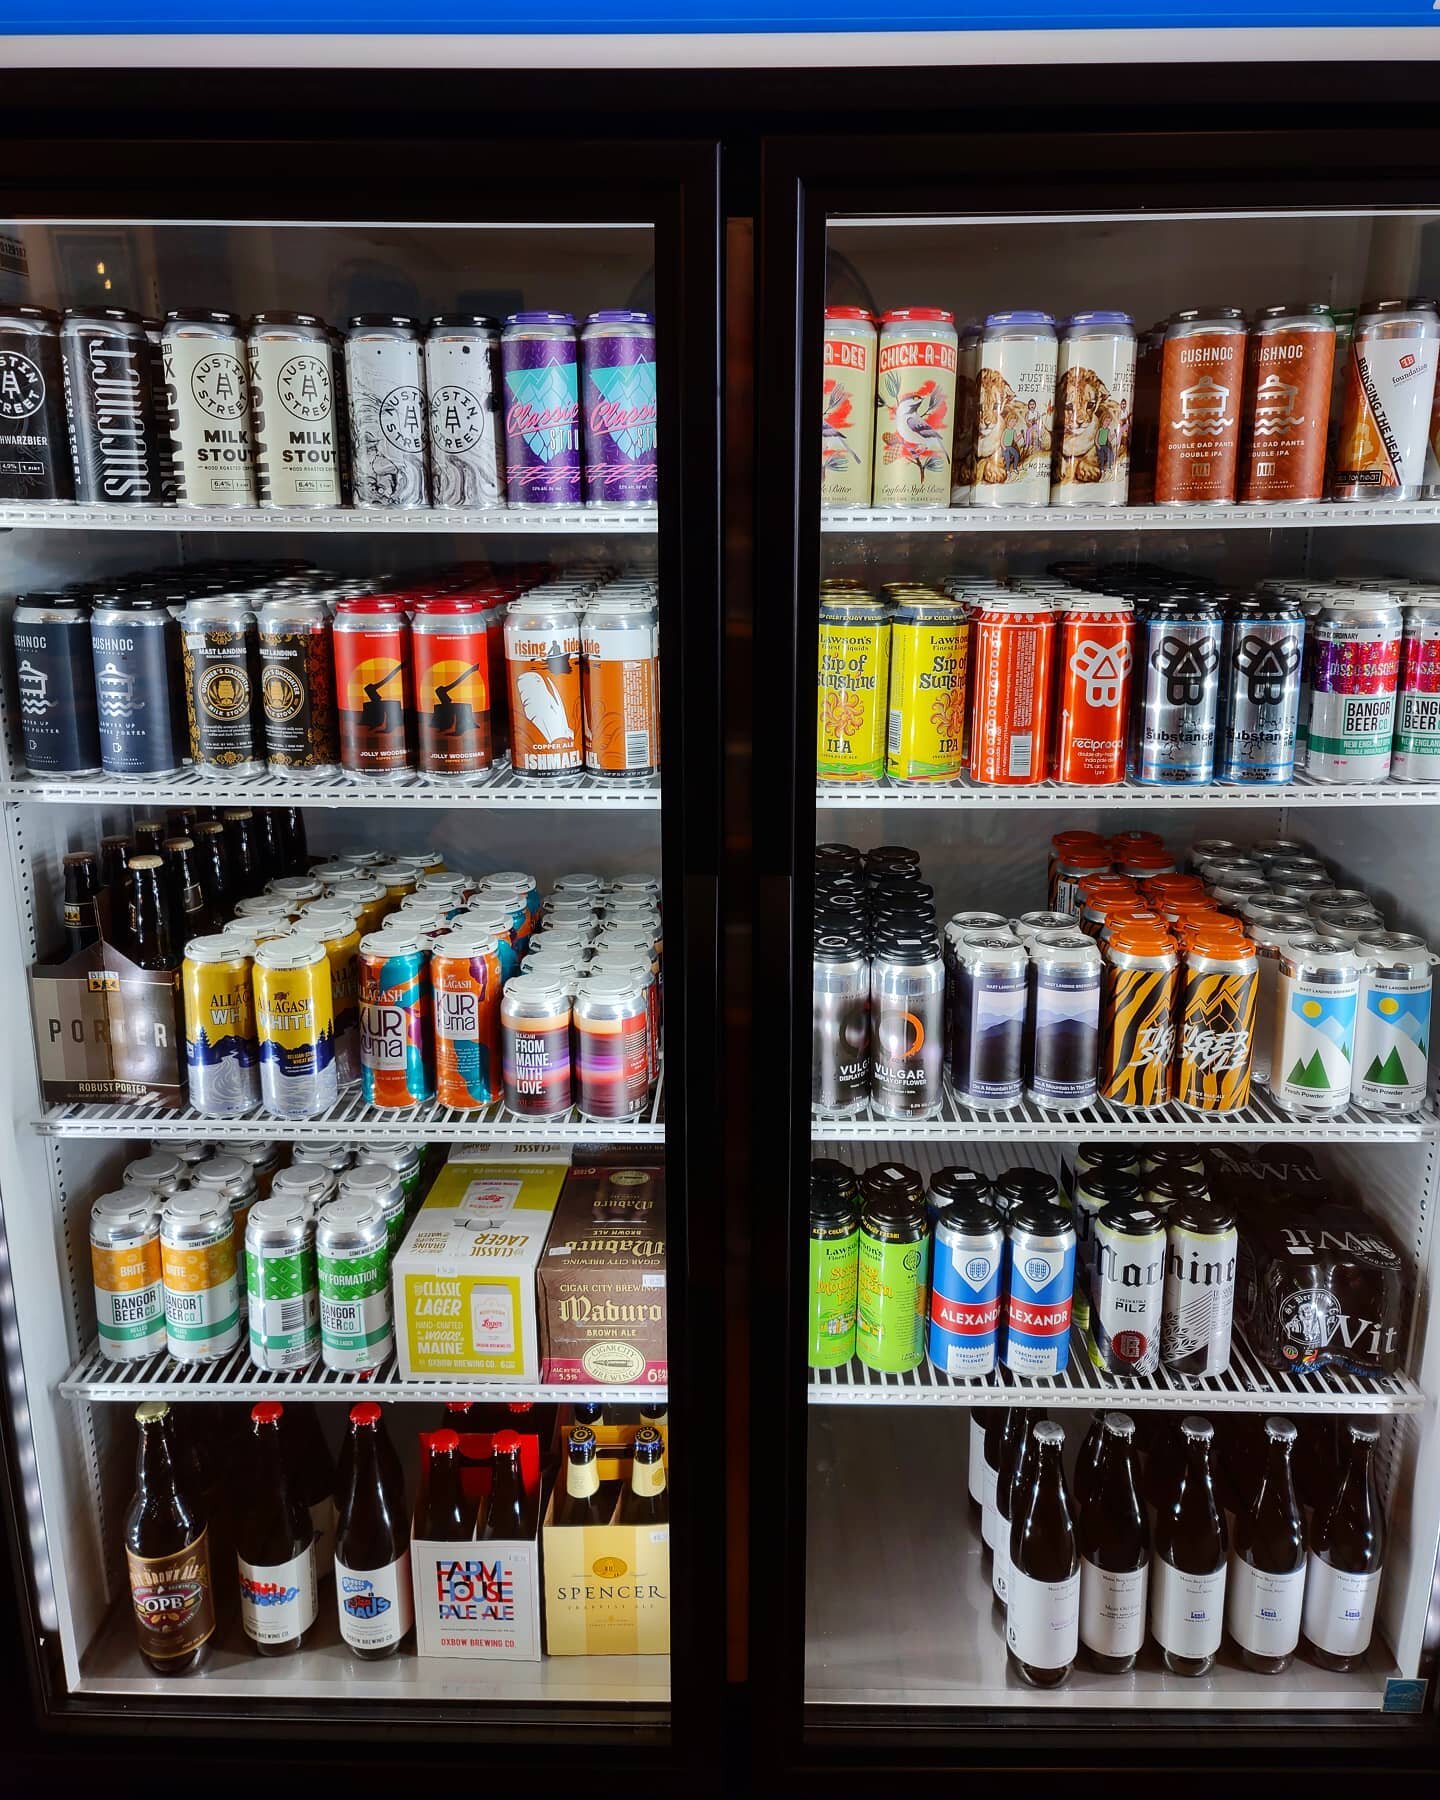 Behold. A brand spankin' new beer fridge. Our old clunker finally went to beer shop heaven (or hell, it never ran that well). We'll be more capable than ever of slinging some frosty boys from here on in. Cheers 🍻
.
.
.
.
.
.
.
.
.
.
.
.
#beershop #b